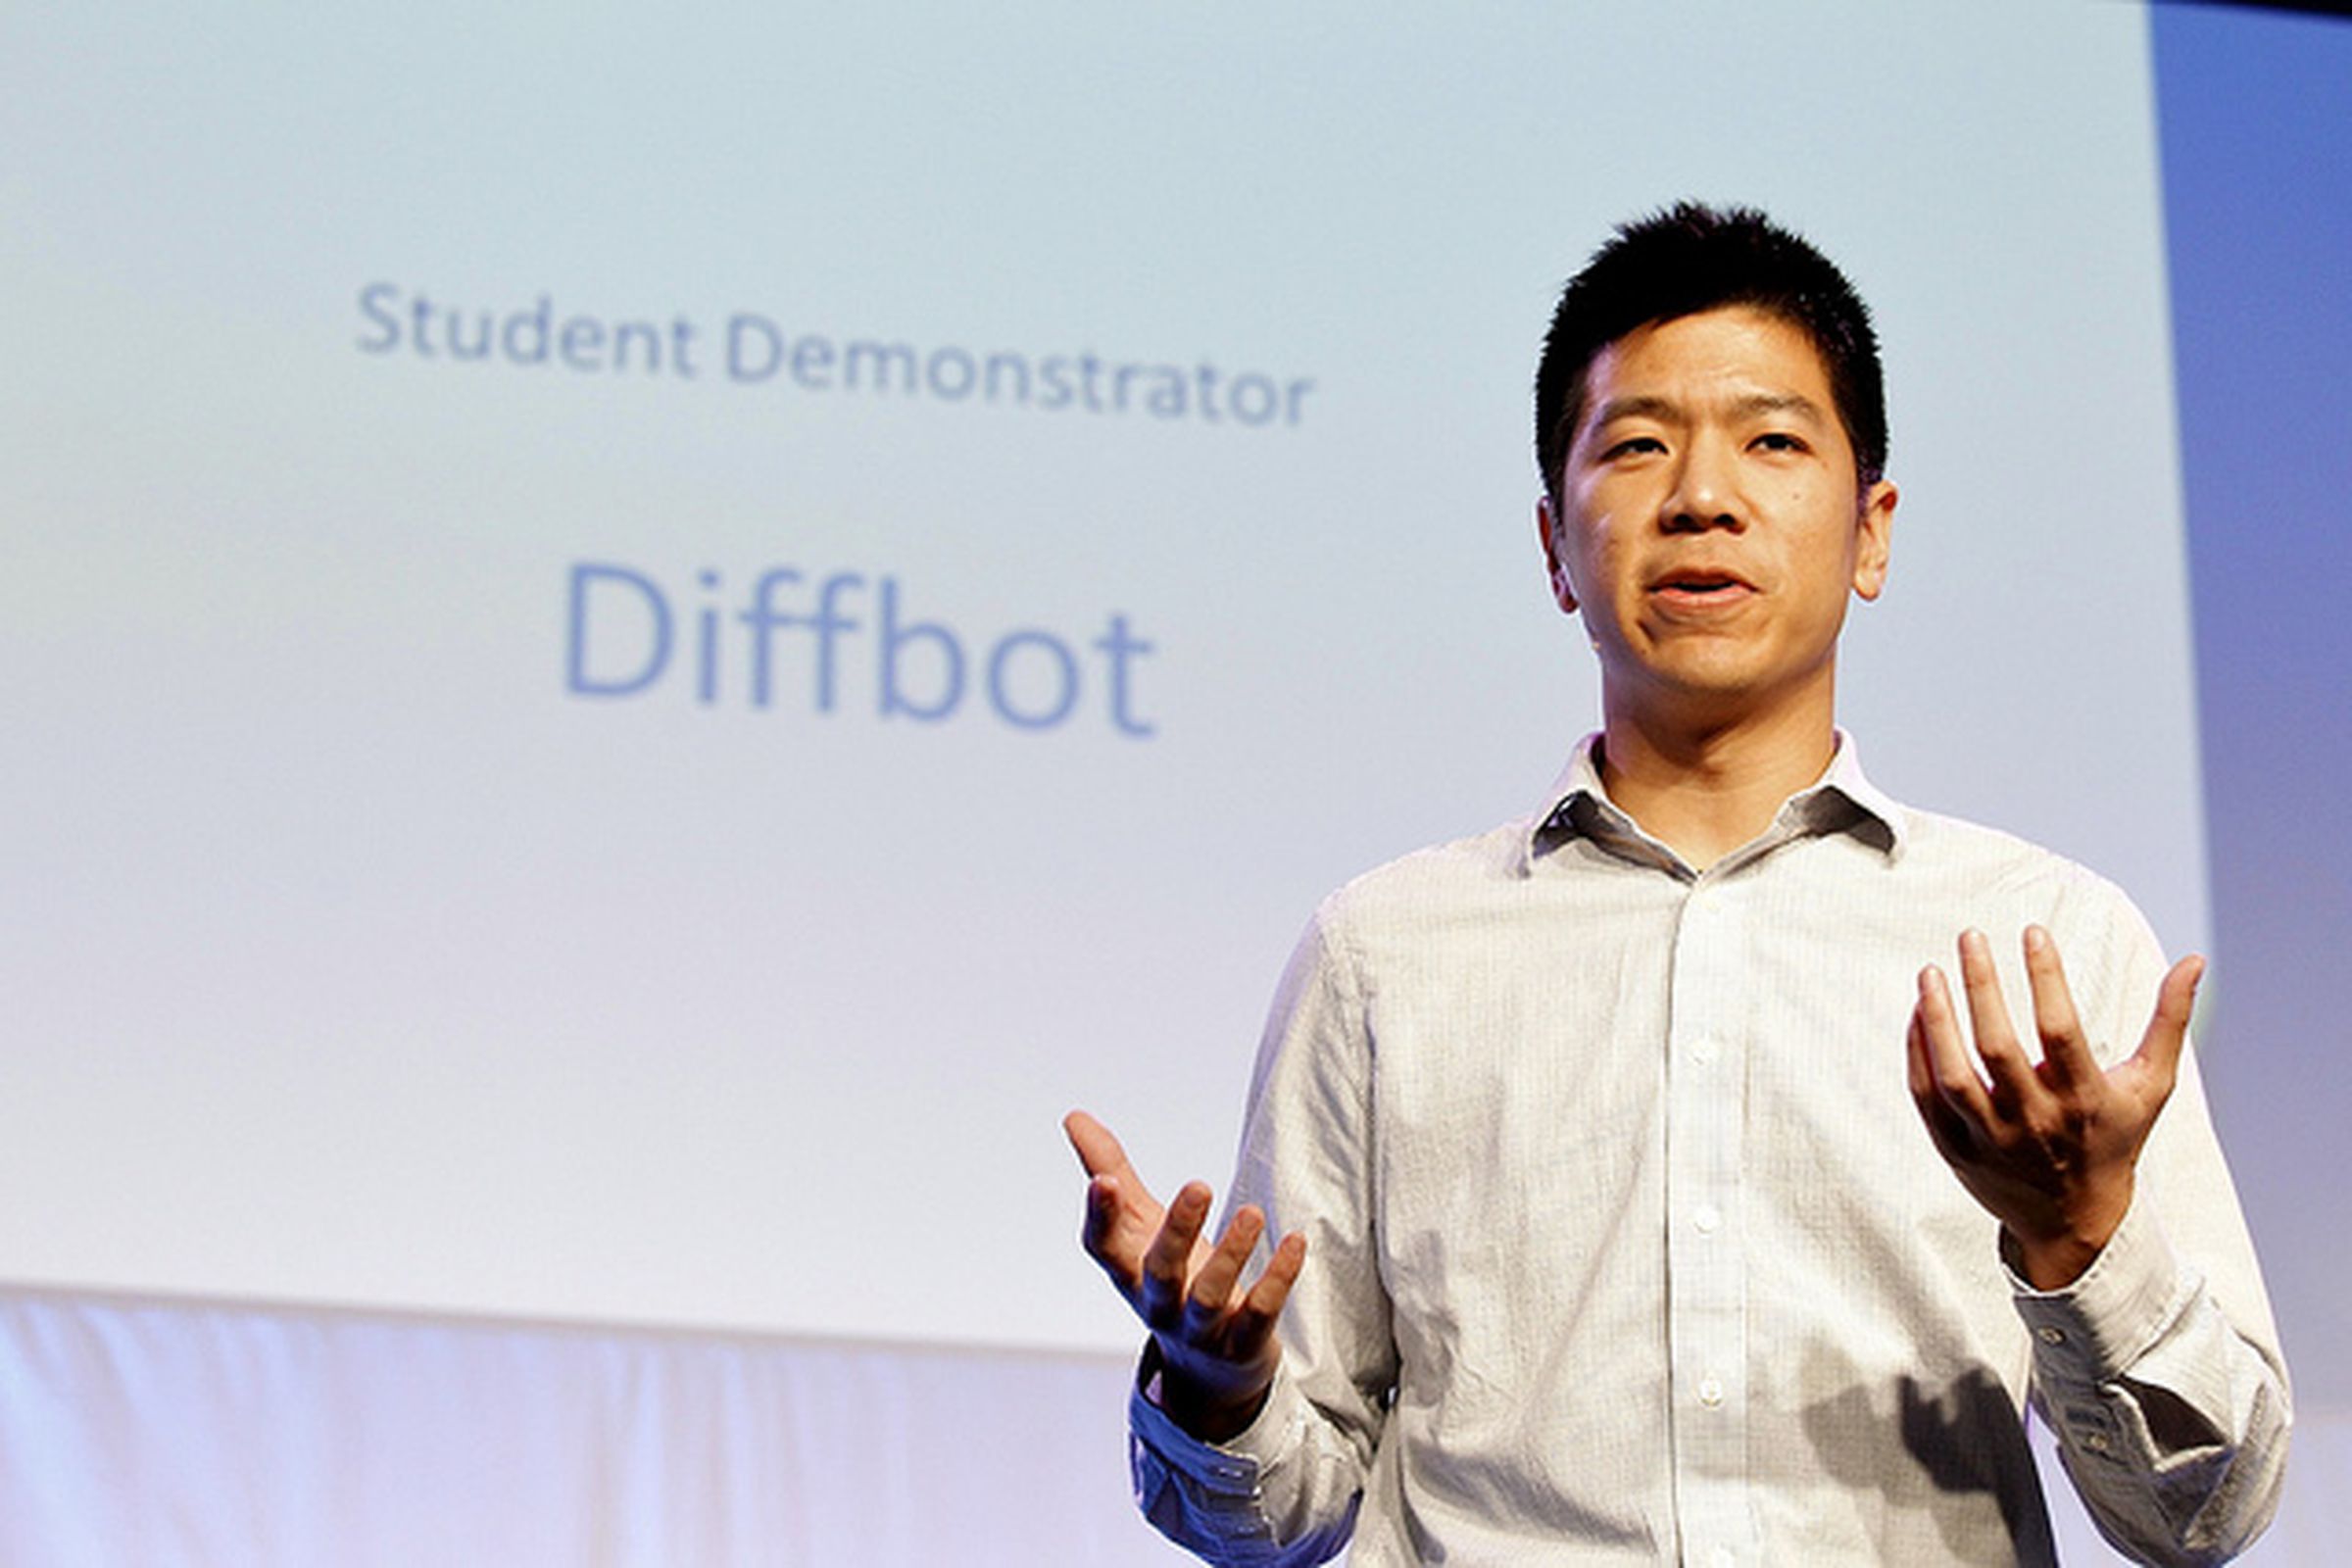 Michael Tung Diffbot - photo by The Demo Conference